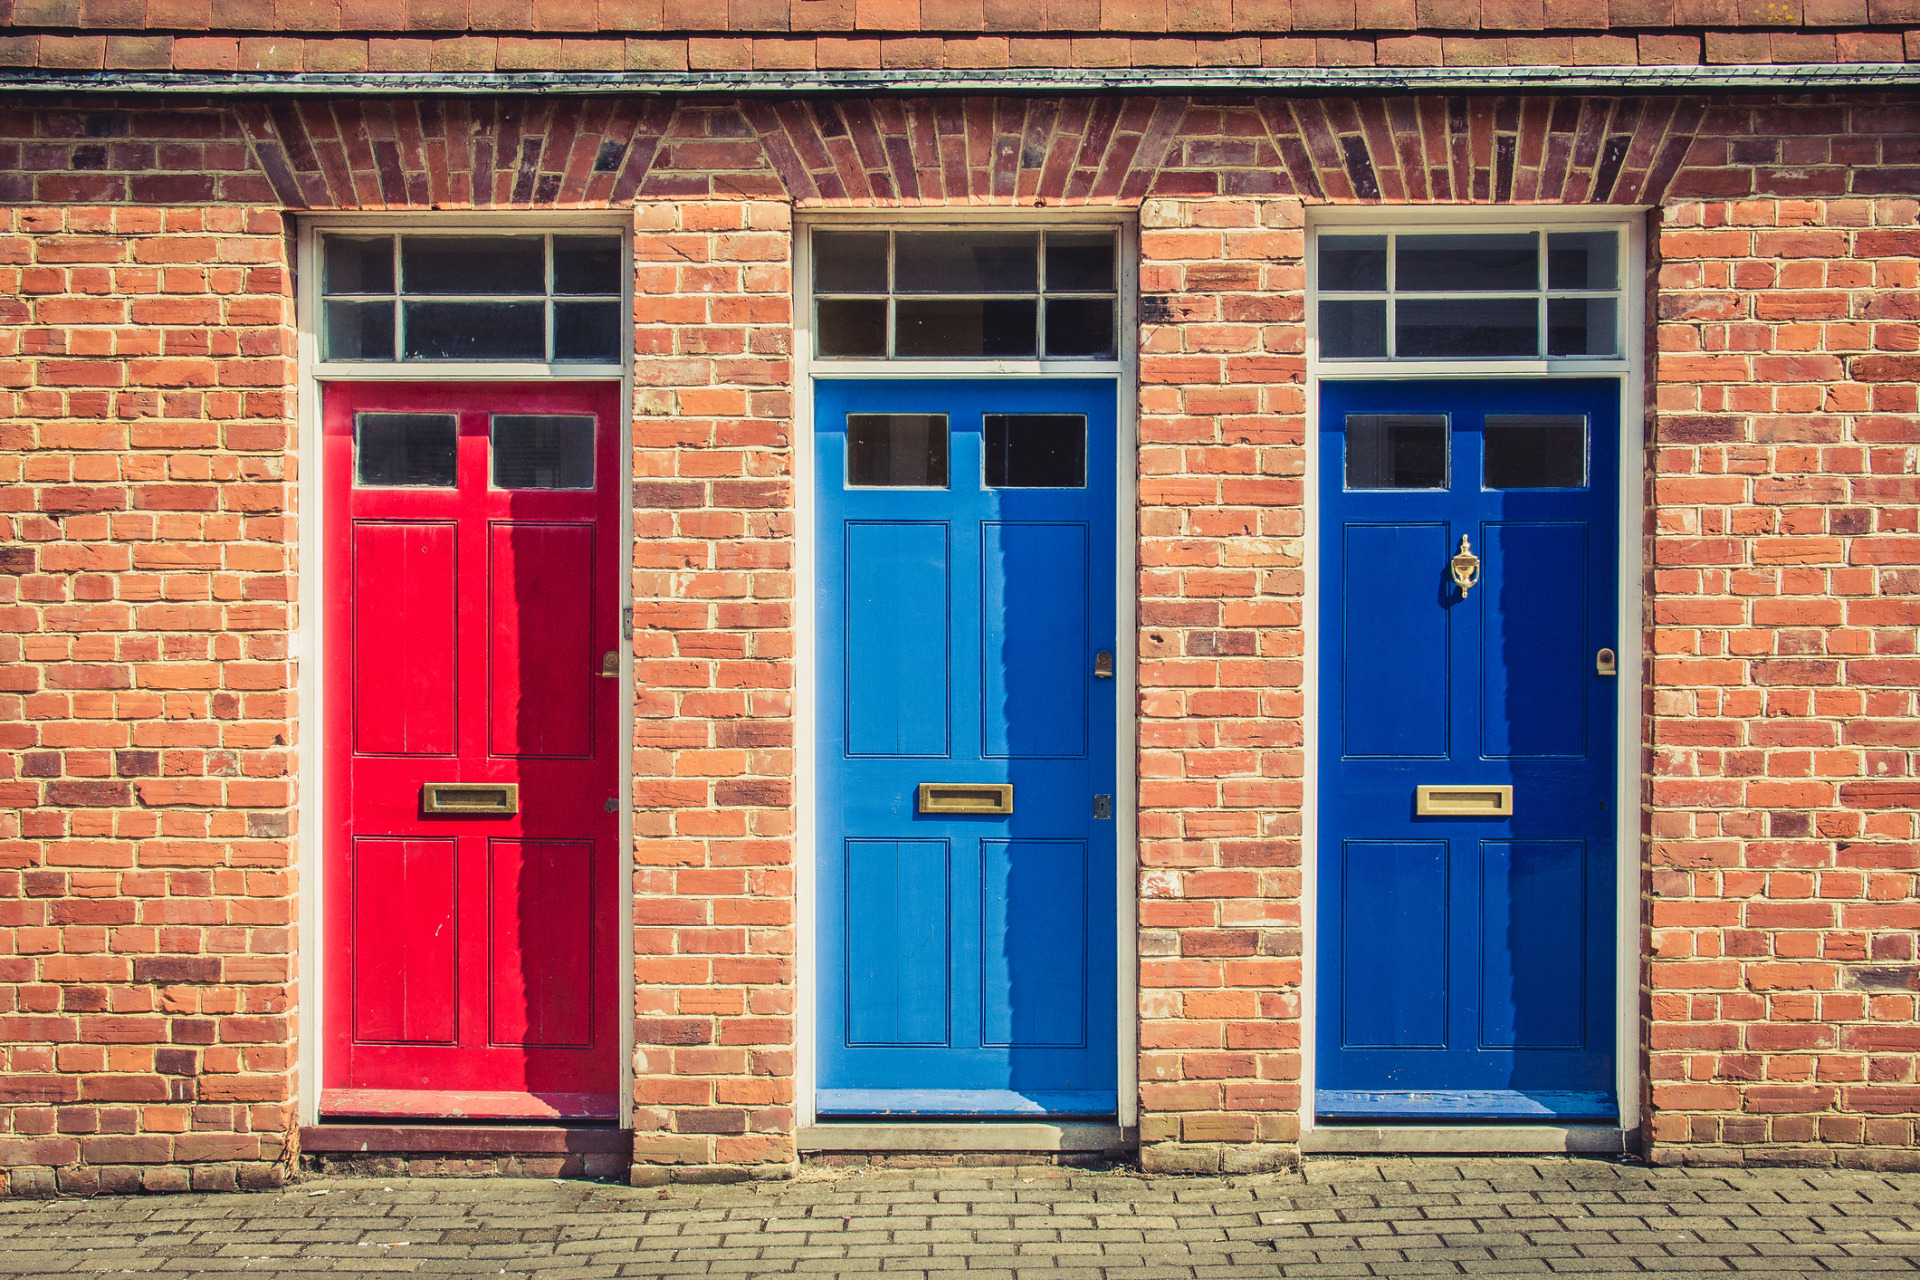 Three property doors, in different colours: red, light blue and dark blue.